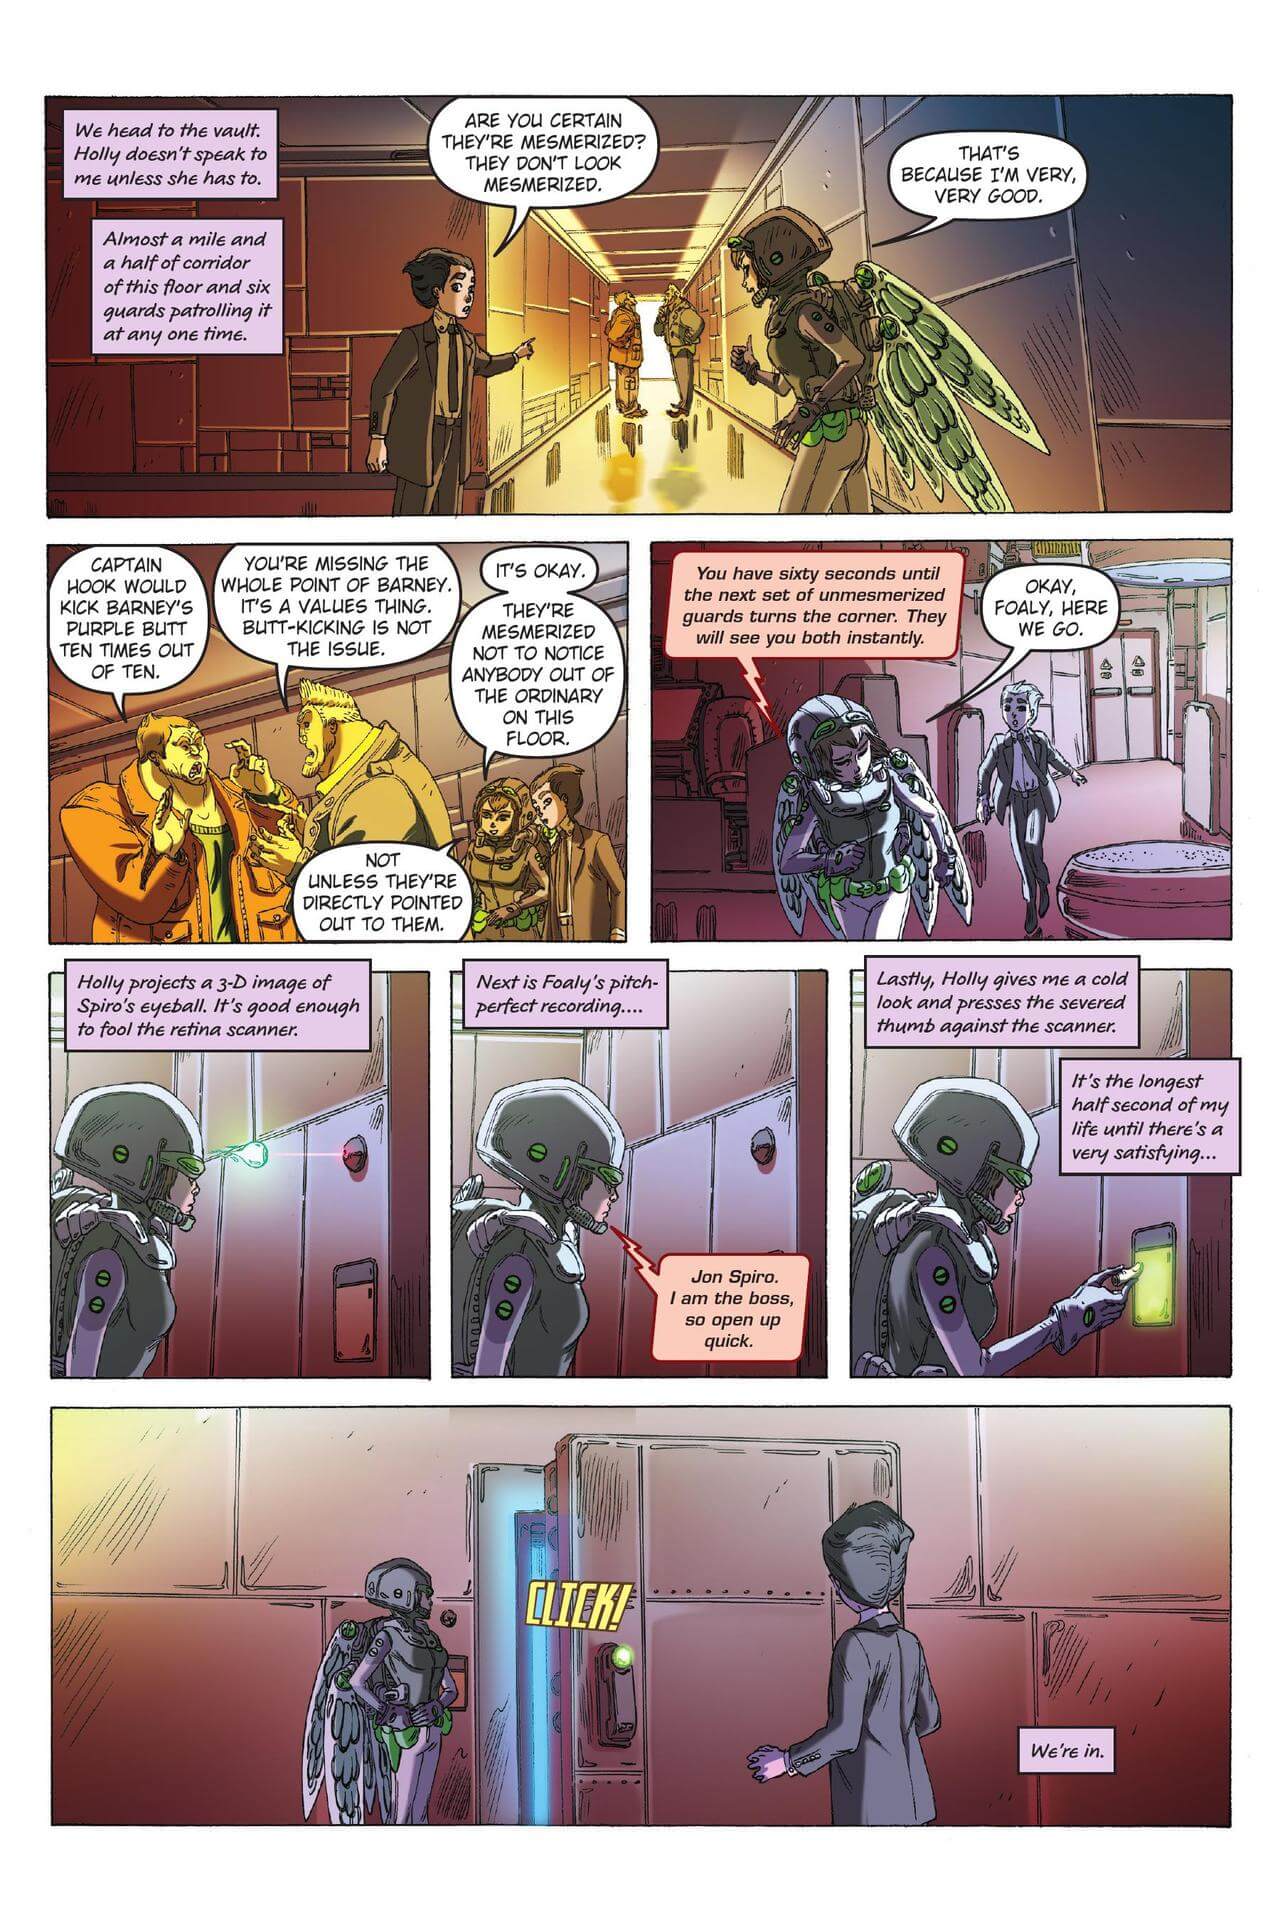 page 88 of artemis fowl eternity code graphic novel